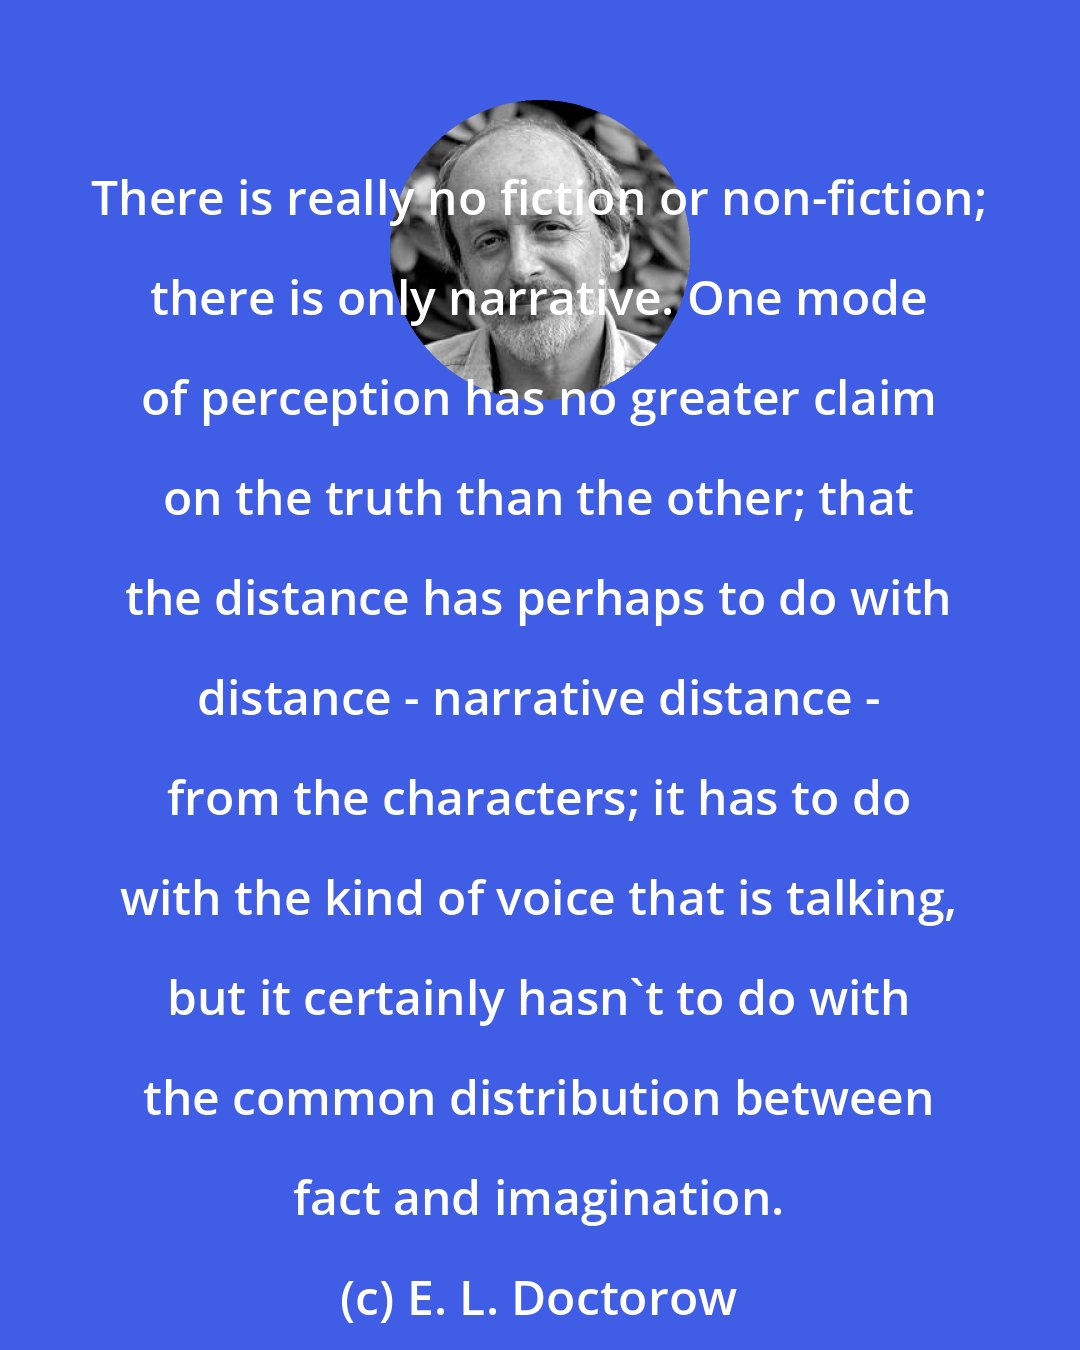 E. L. Doctorow: There is really no fiction or non-fiction; there is only narrative. One mode of perception has no greater claim on the truth than the other; that the distance has perhaps to do with distance - narrative distance - from the characters; it has to do with the kind of voice that is talking, but it certainly hasn't to do with the common distribution between fact and imagination.